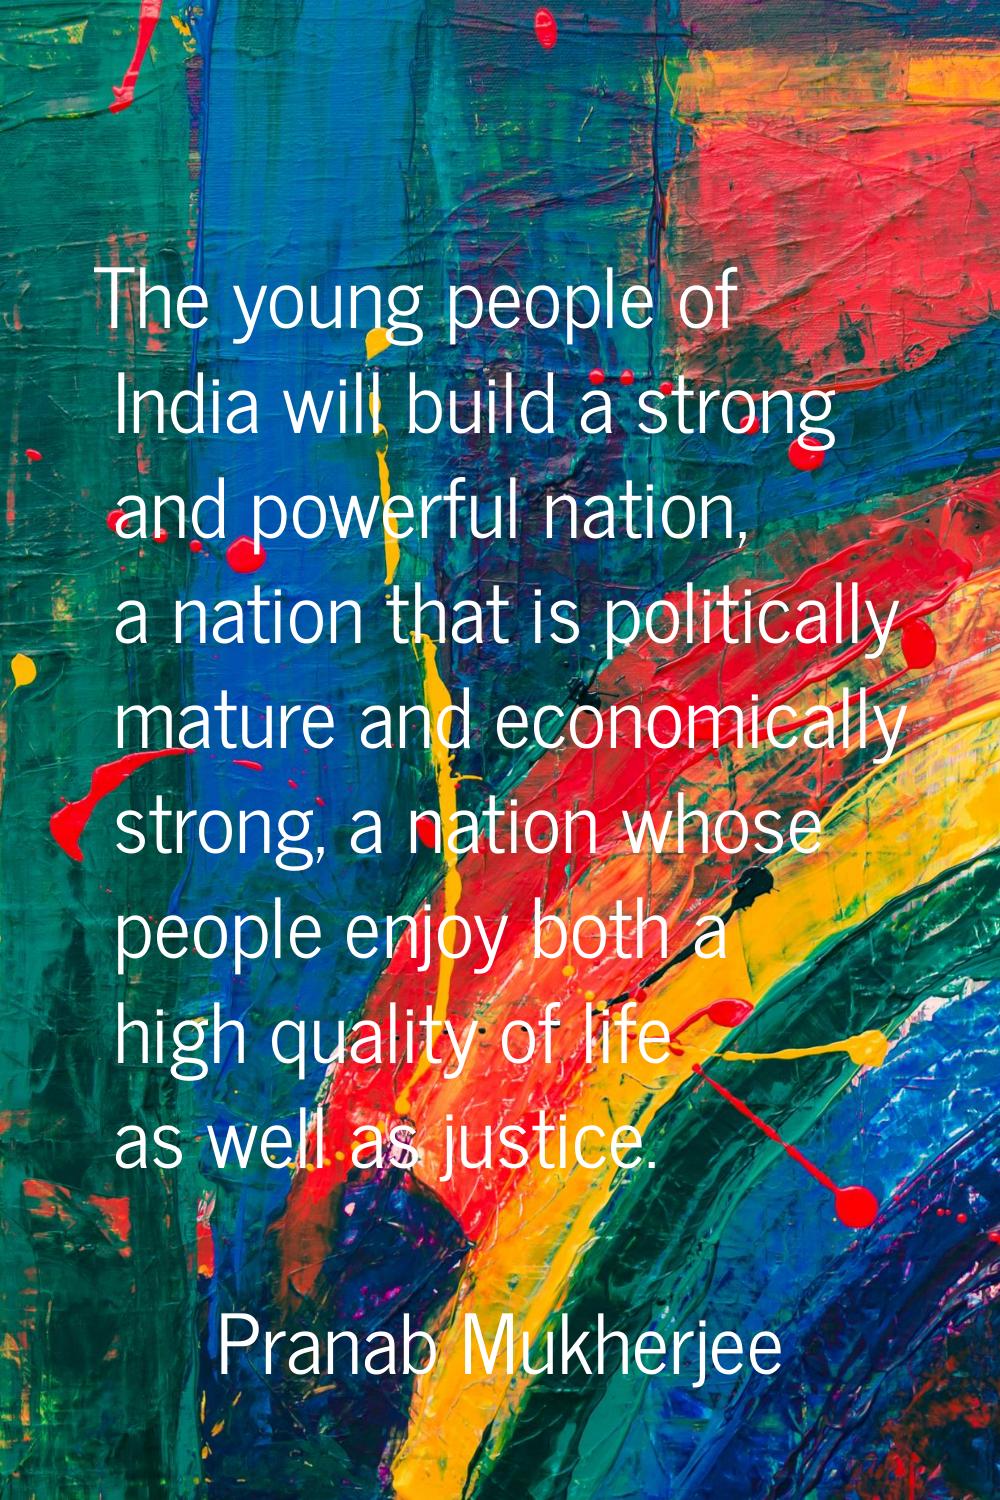 The young people of India will build a strong and powerful nation, a nation that is politically mat